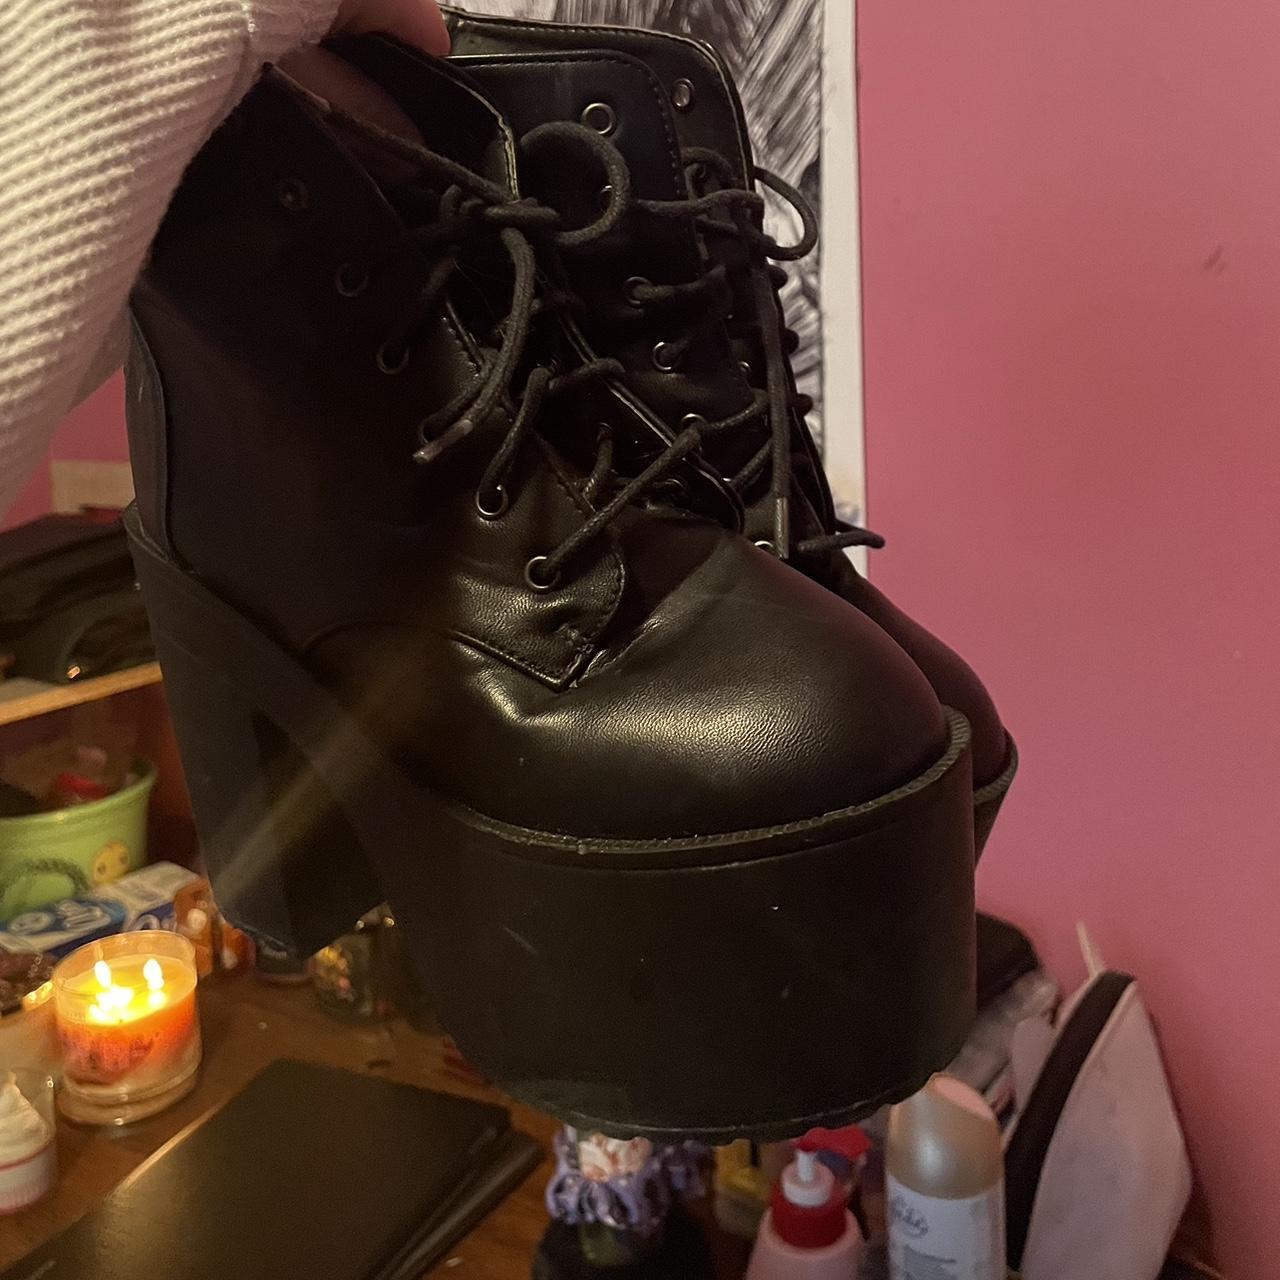 Stomp You Out HotTopic Goth Platform Boots bought... - Depop